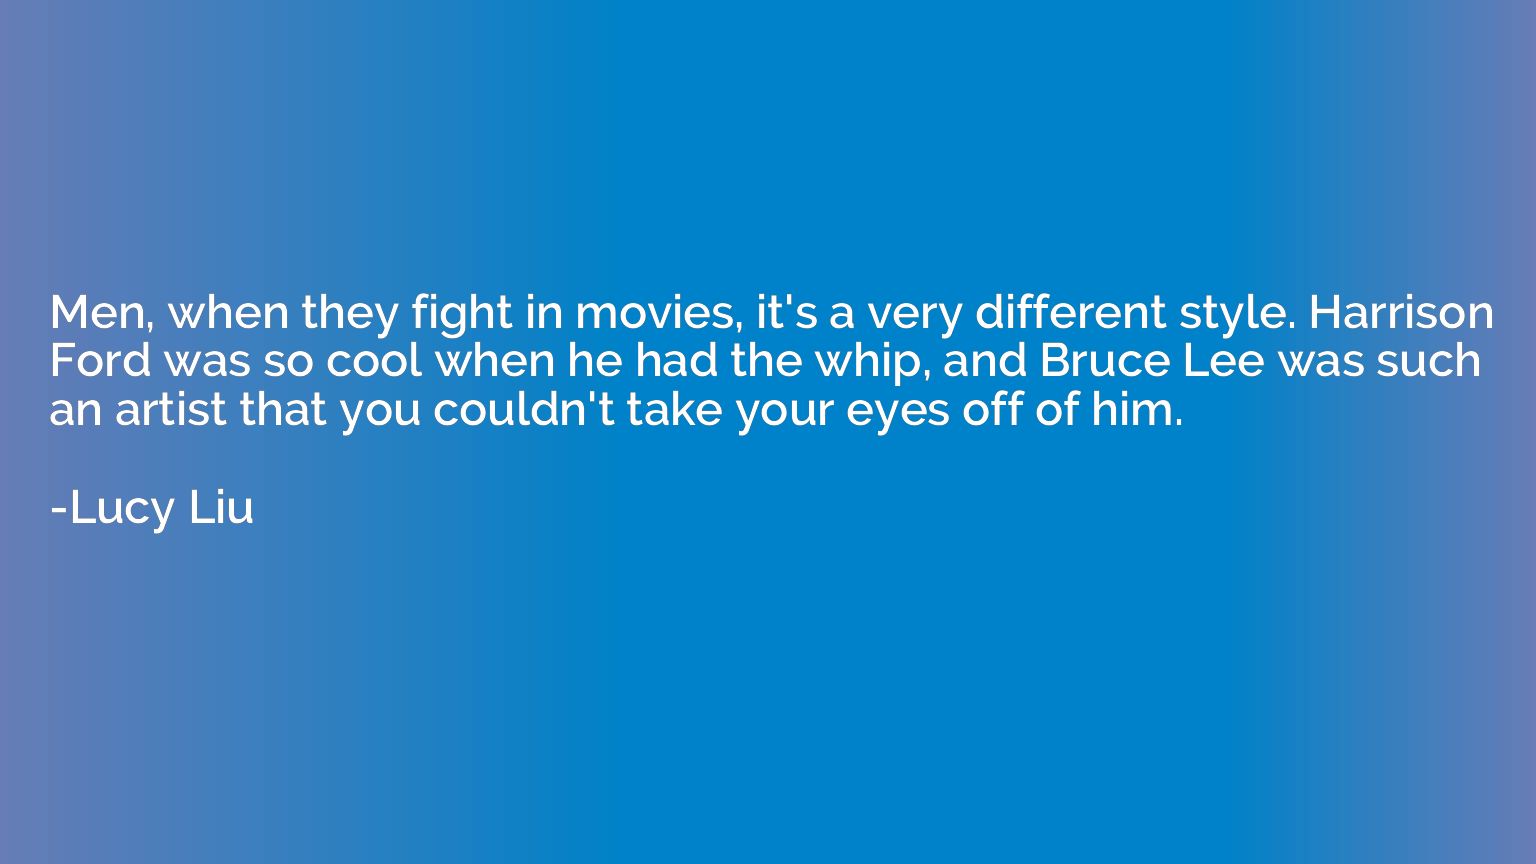 Men, when they fight in movies, it's a very different style.